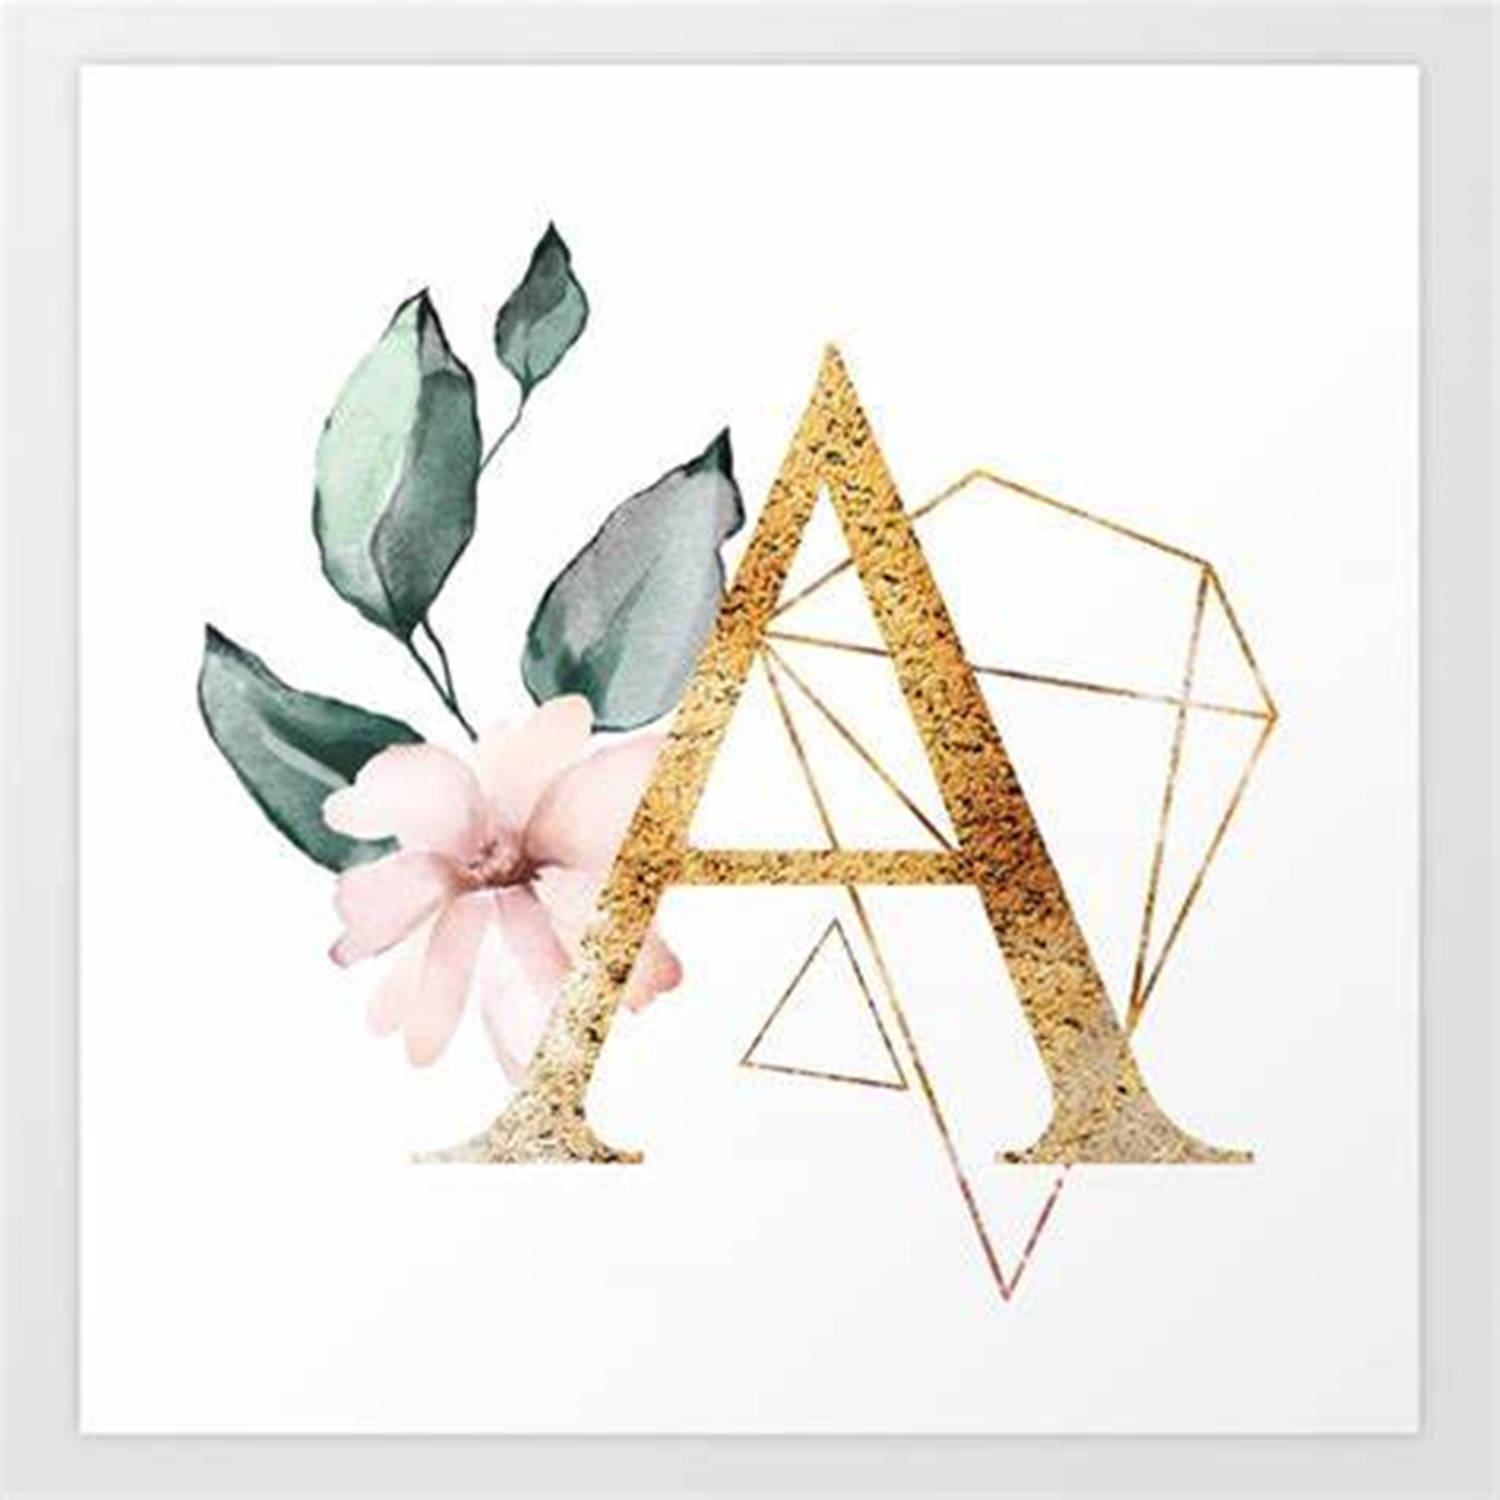 Extravagant Golden Capital Alphabet Letter A With Brilliant Diamonds And Adorned With Elegant Flowers